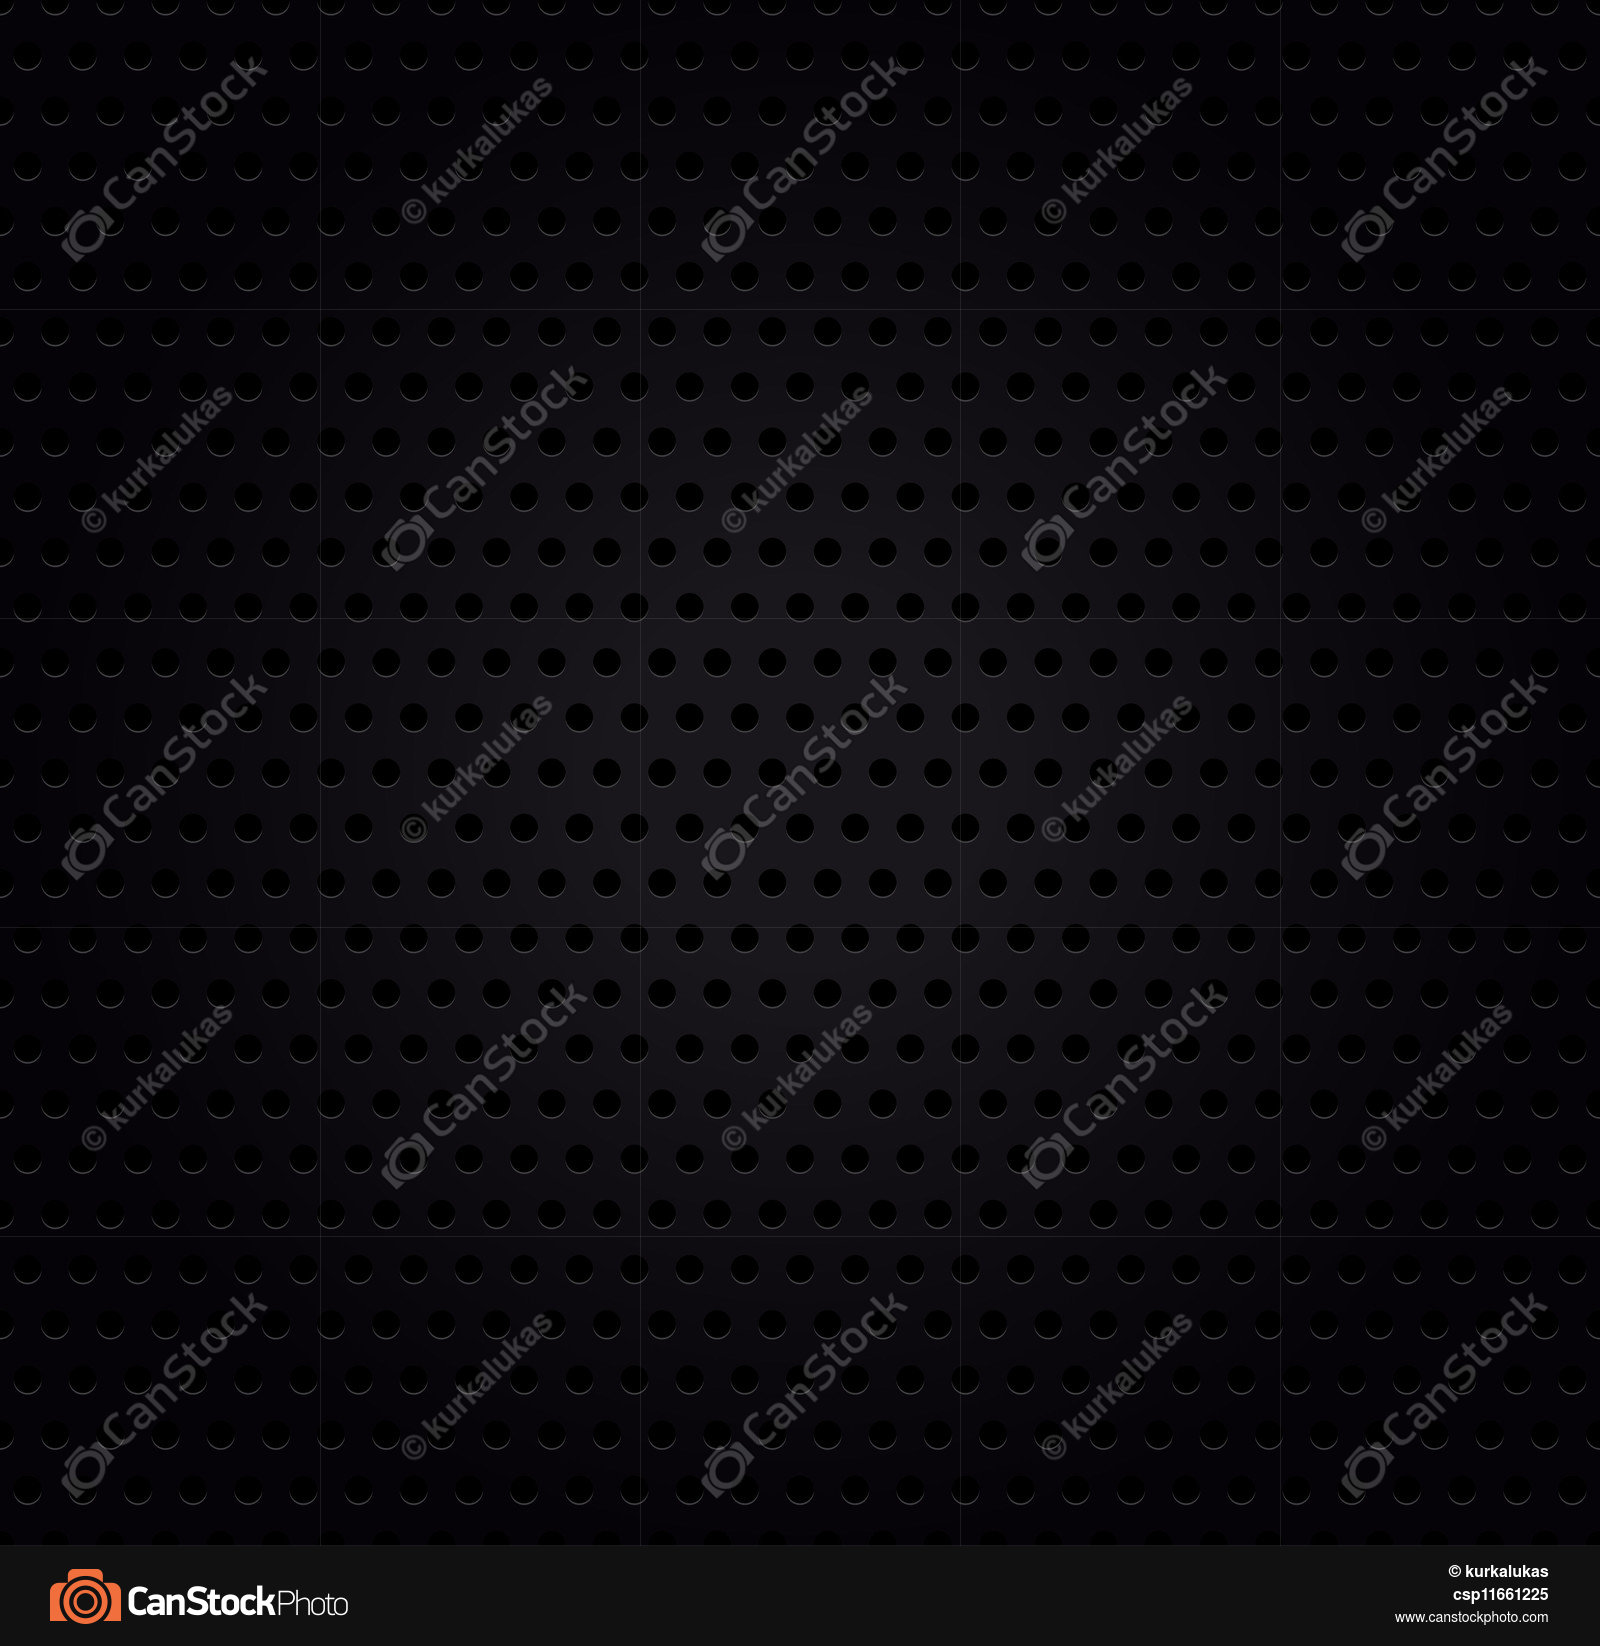 Metallic black perforated background vector illustration - Search ...